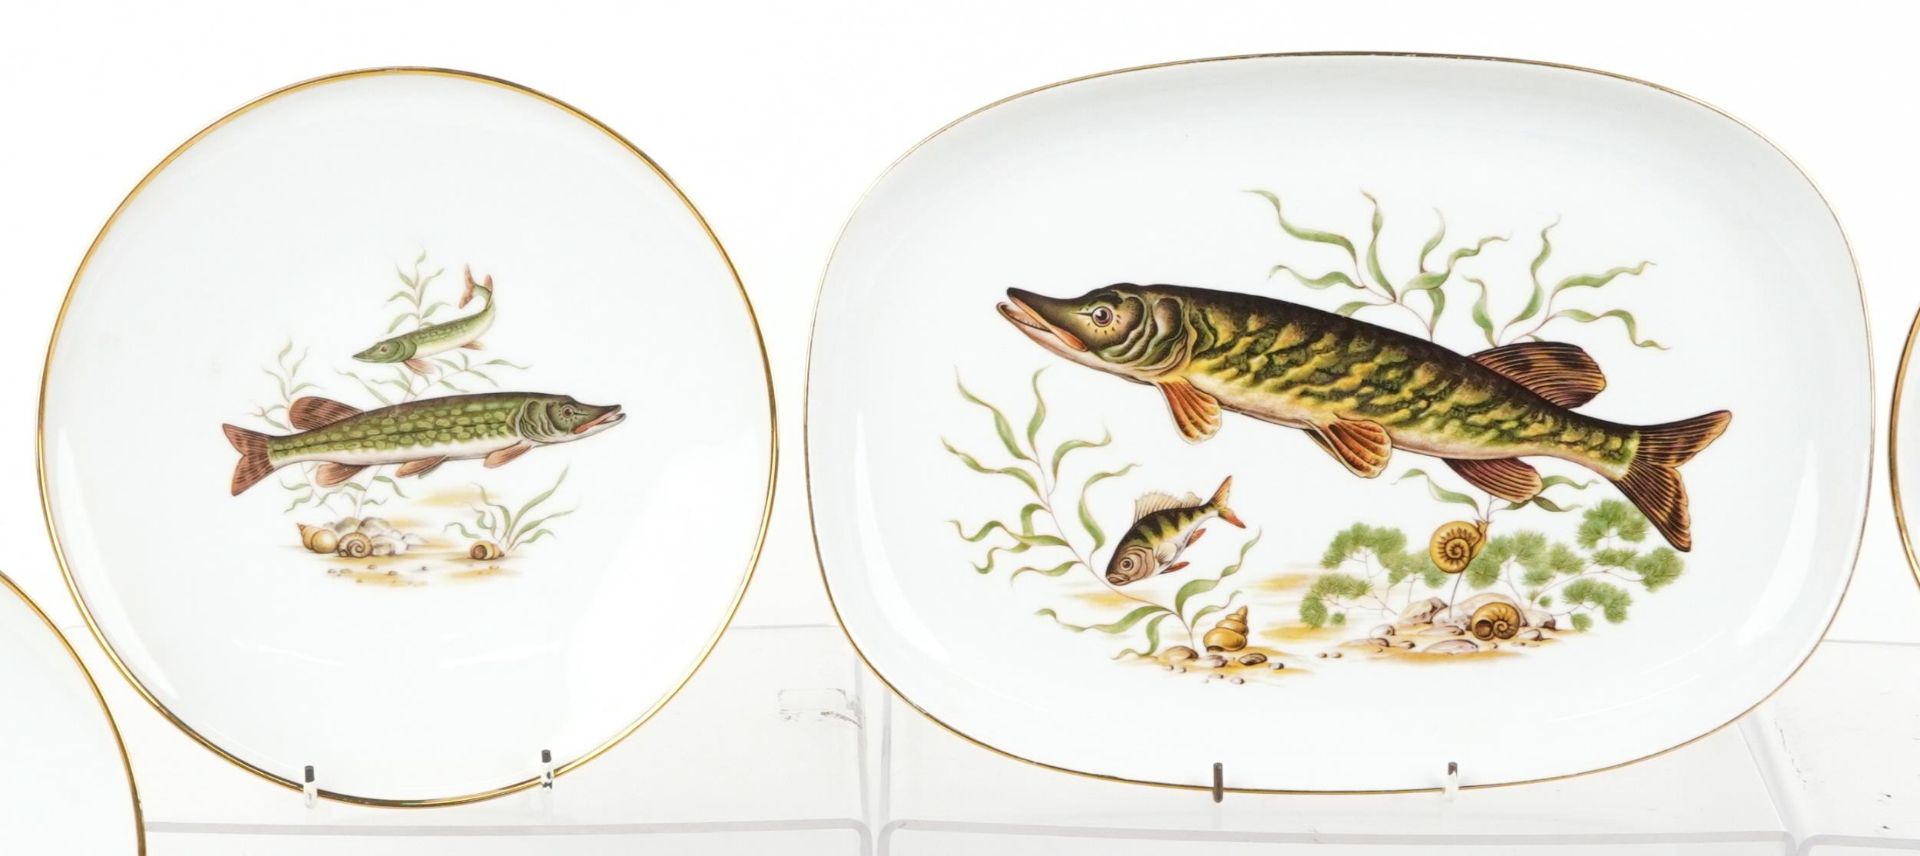 J K W Decor Carlsbad, Bavarian porcelain fish service decorated with various fish comprising - Image 2 of 6